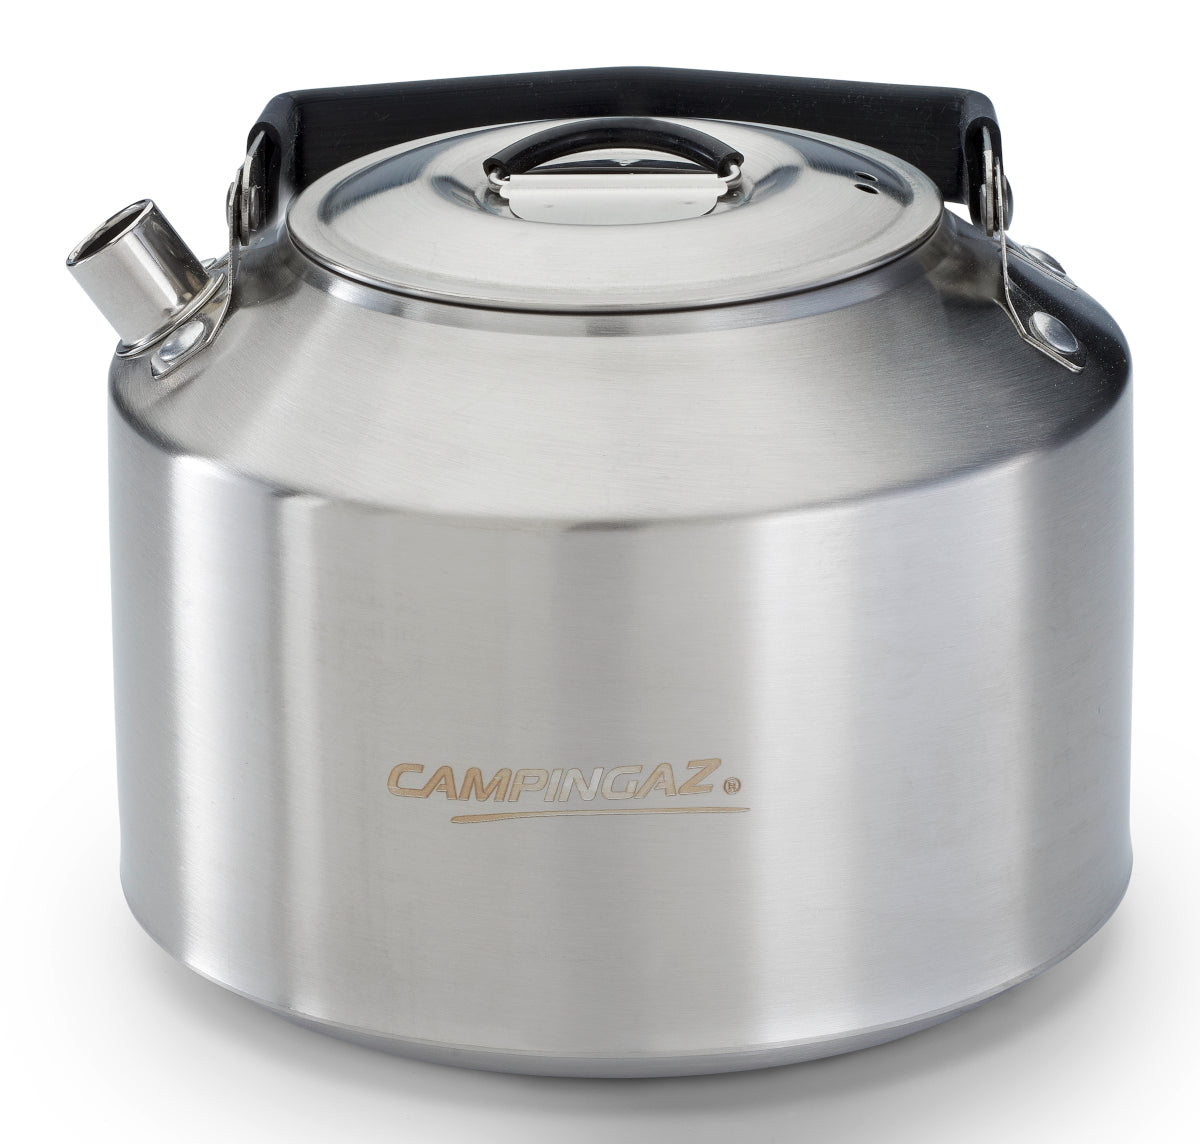 Campingaz 1.5L Stainless Steel Kettle